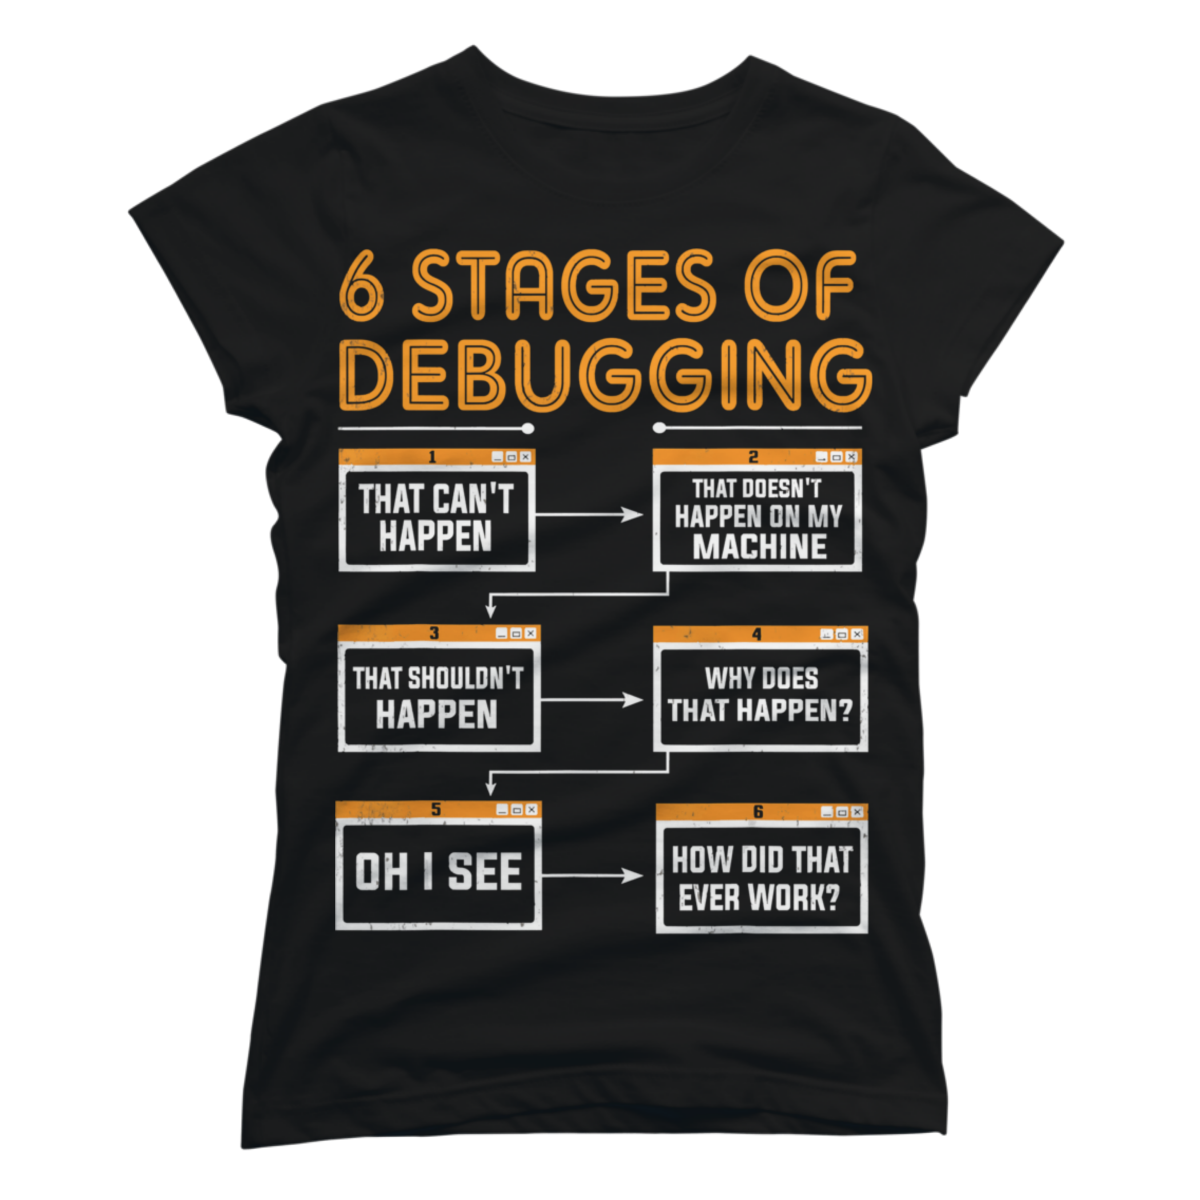 6 stages of debugging shirt